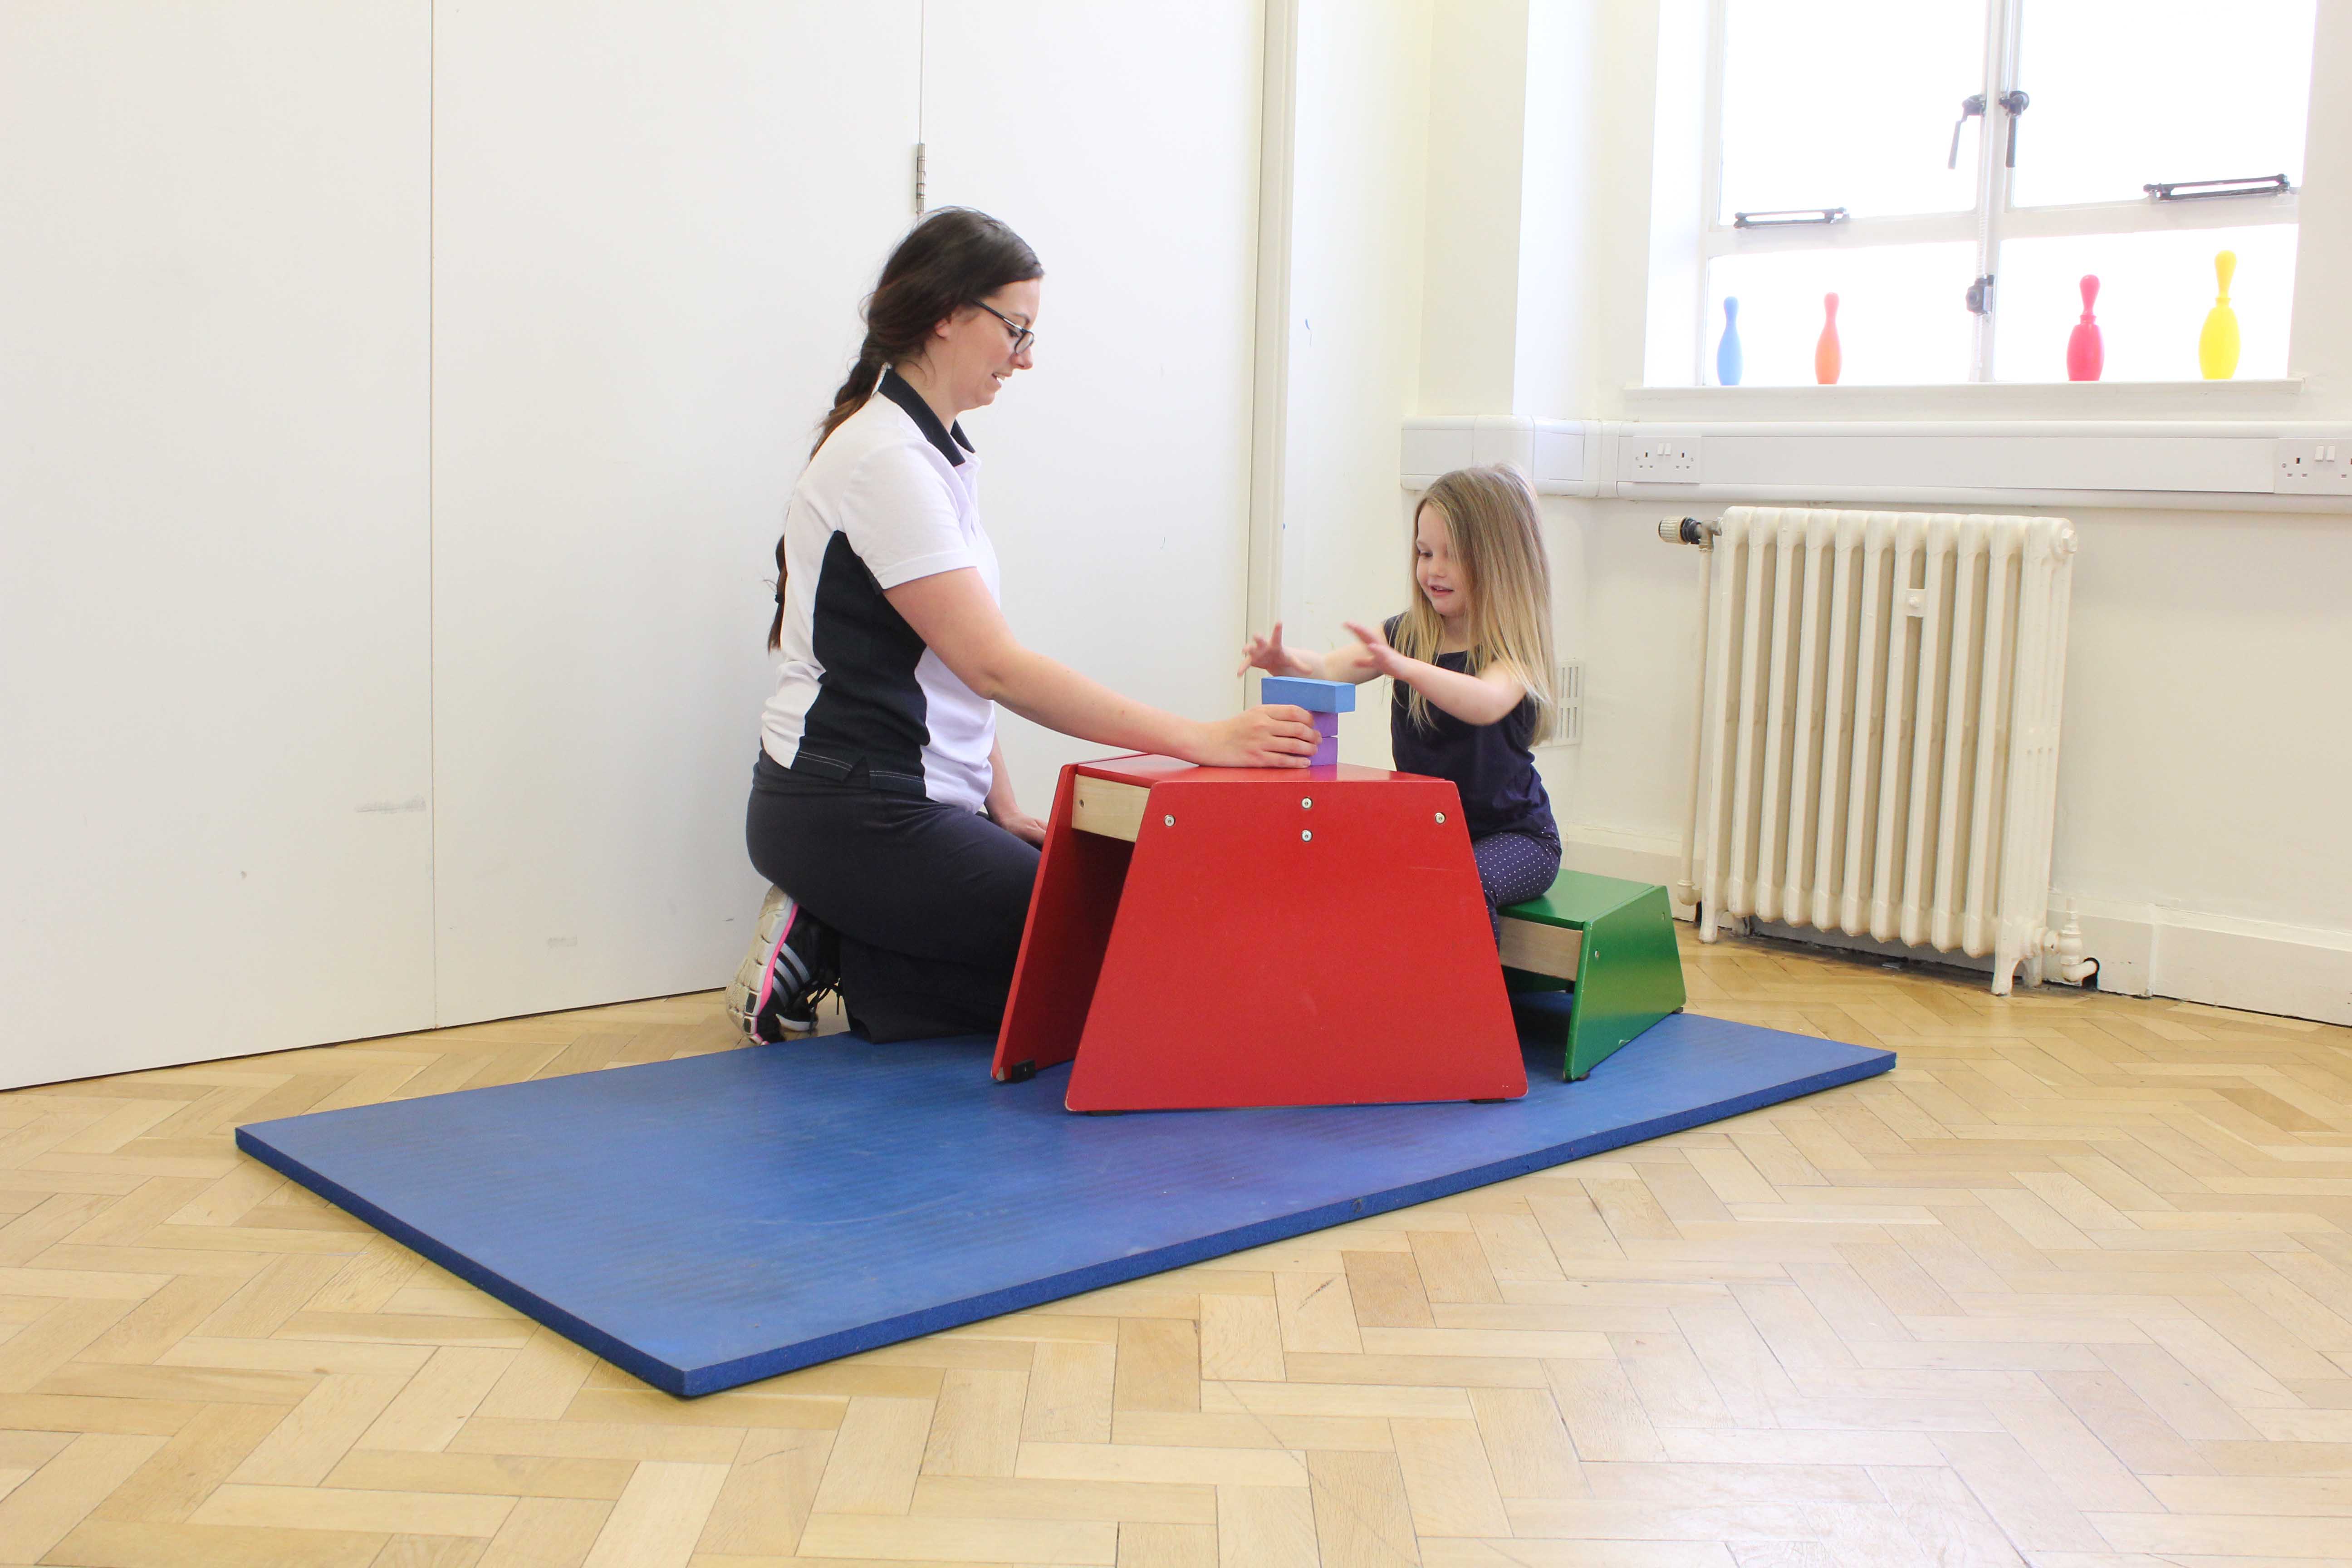 Functional fine motor skill exercises supervised by a neurological paediatric physiotherapist